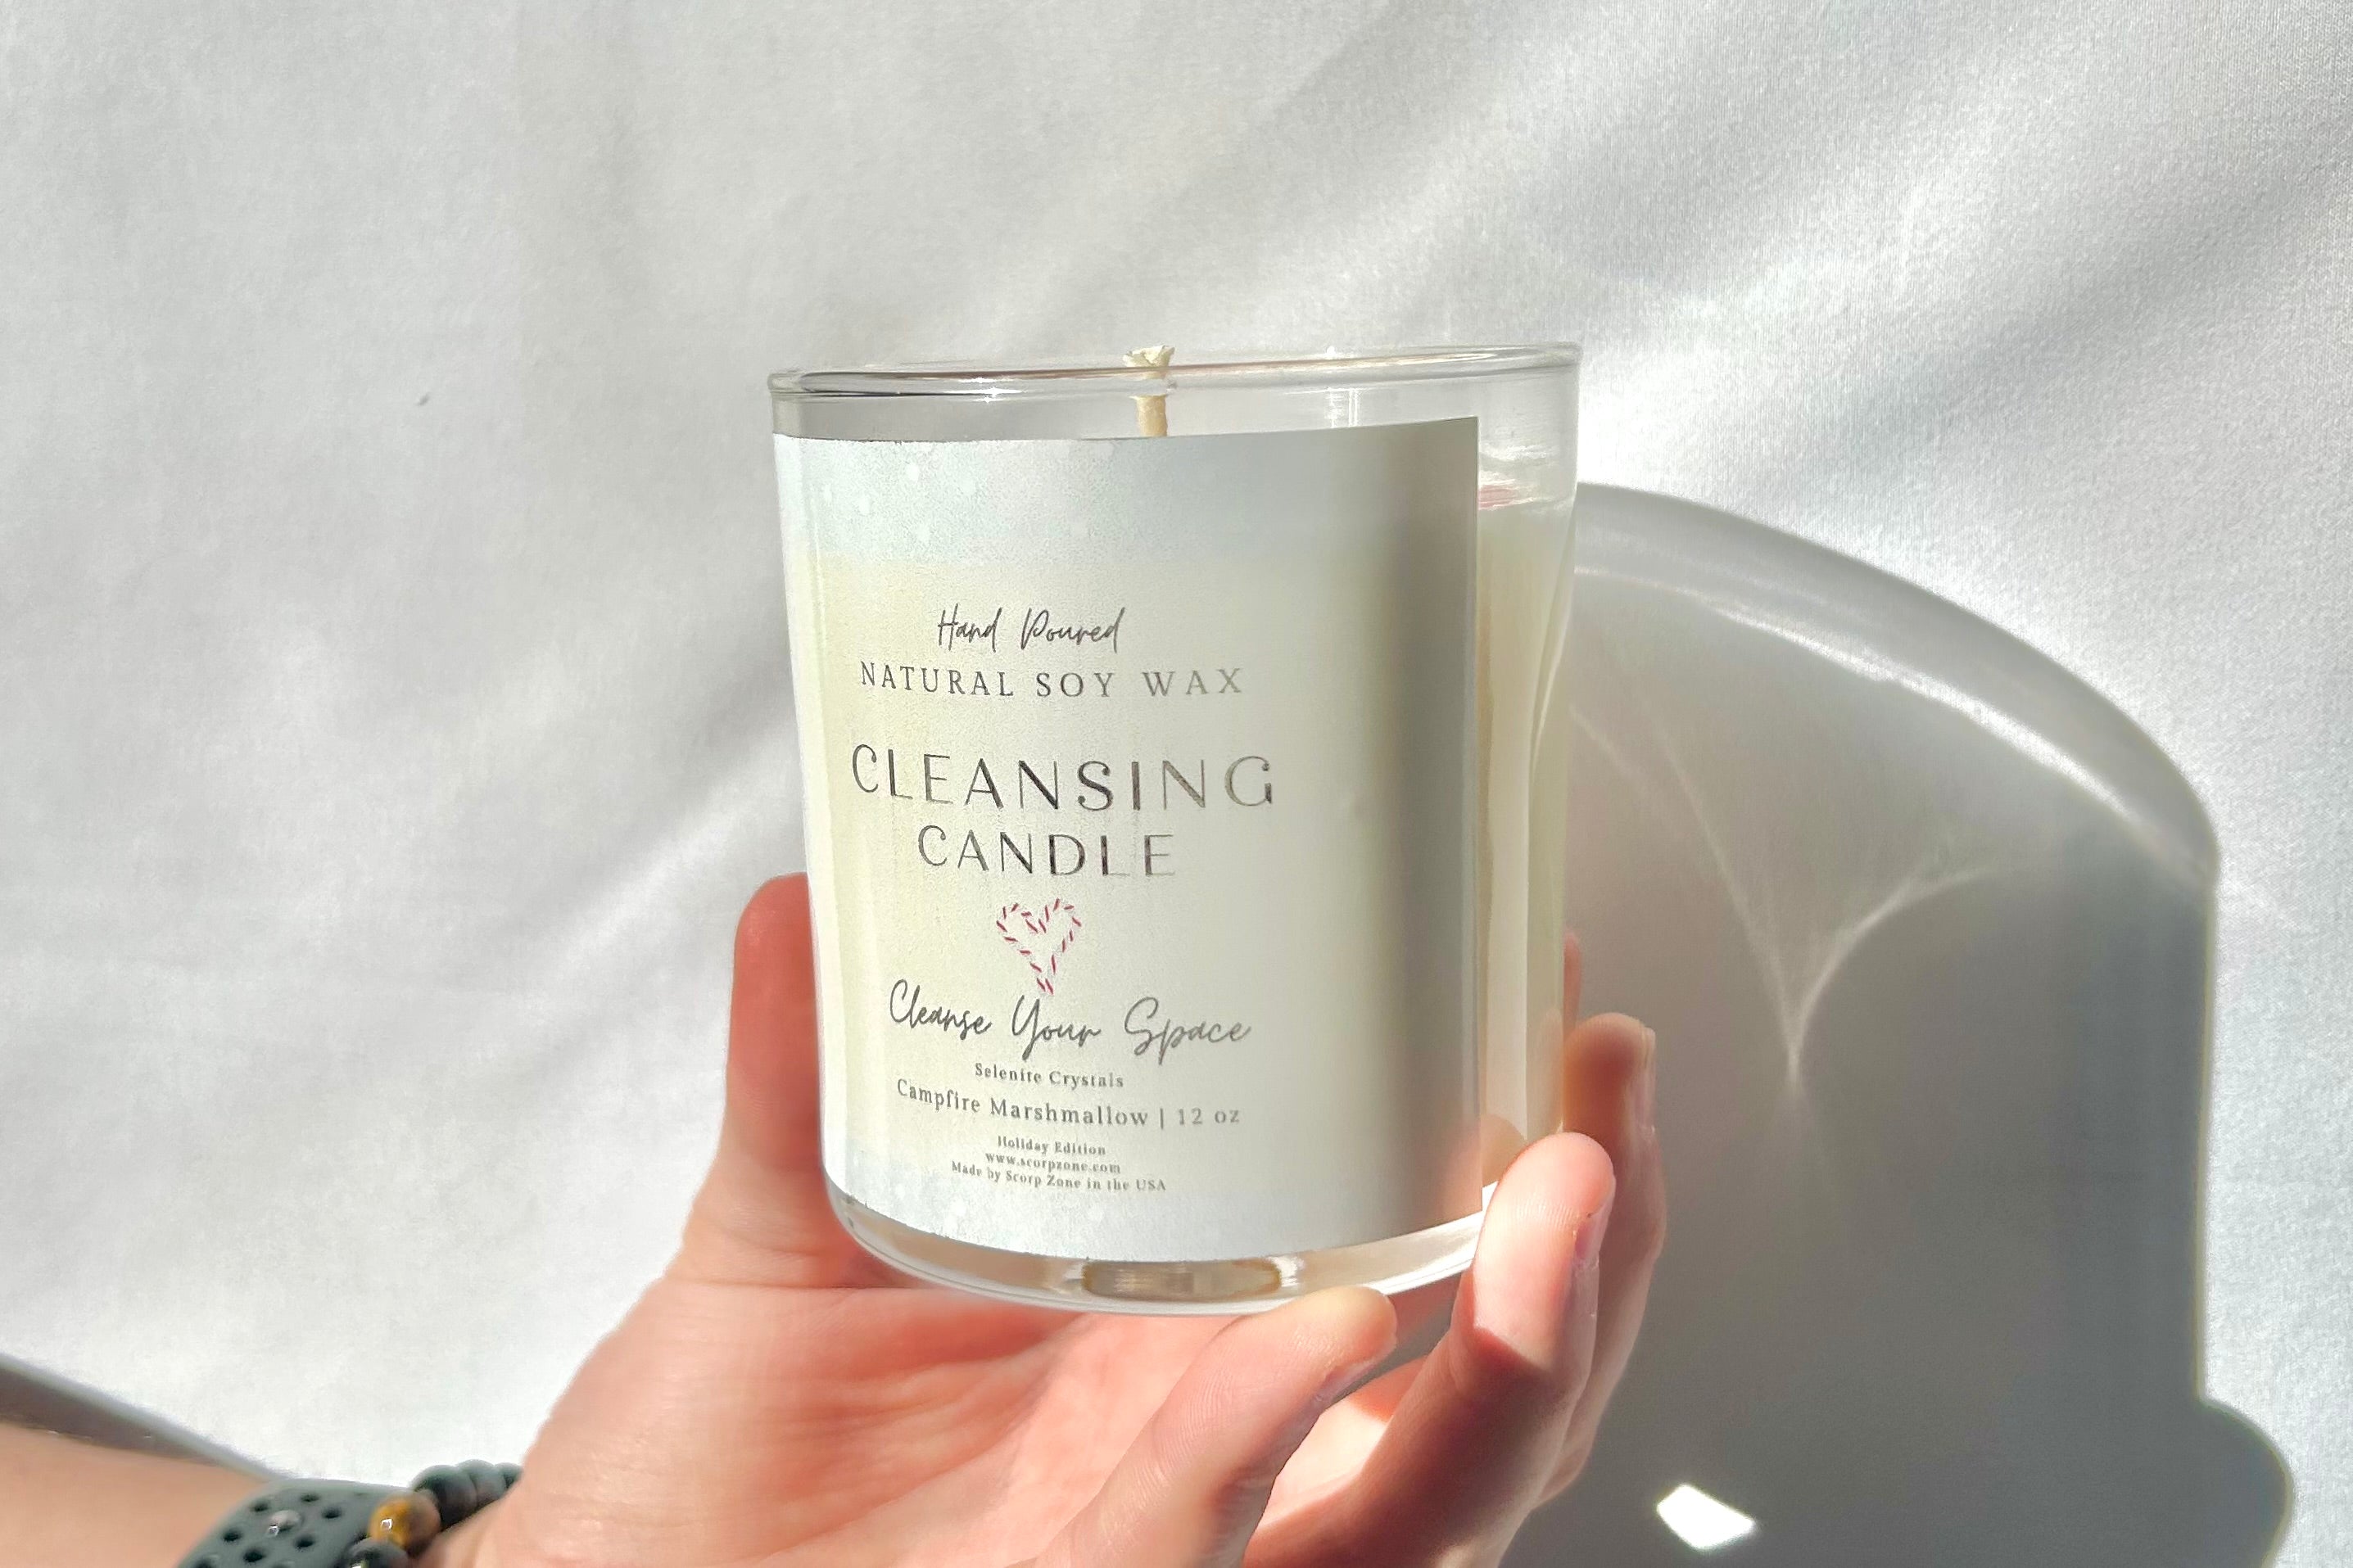 Cleansing Crystal Soy Wax Candle by Scorp Zone